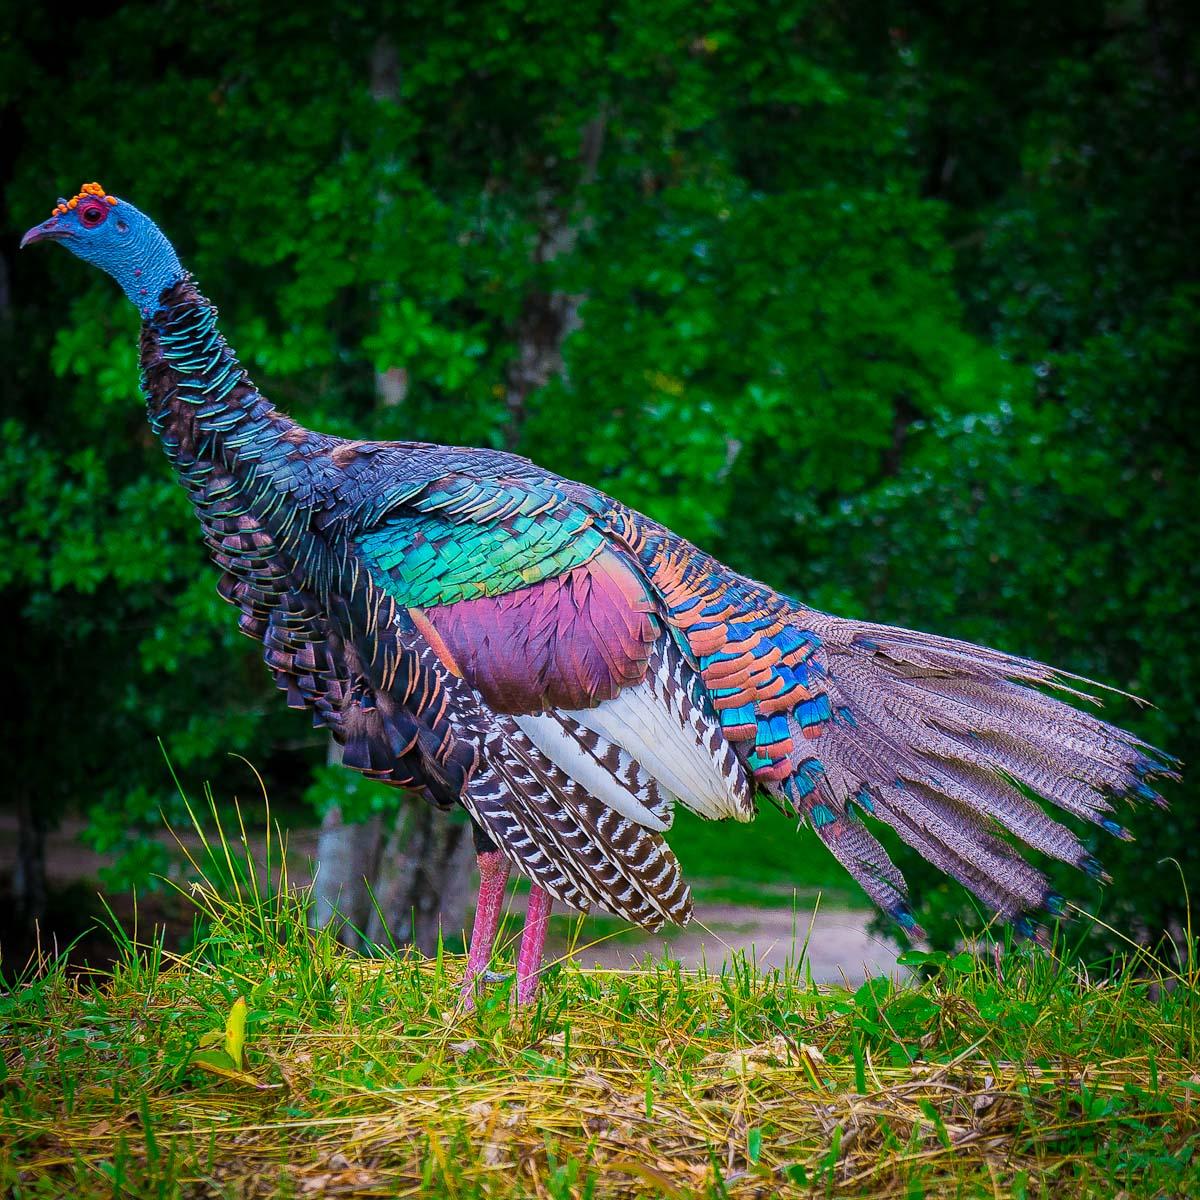 This is what an Ocellated Turkey looks like